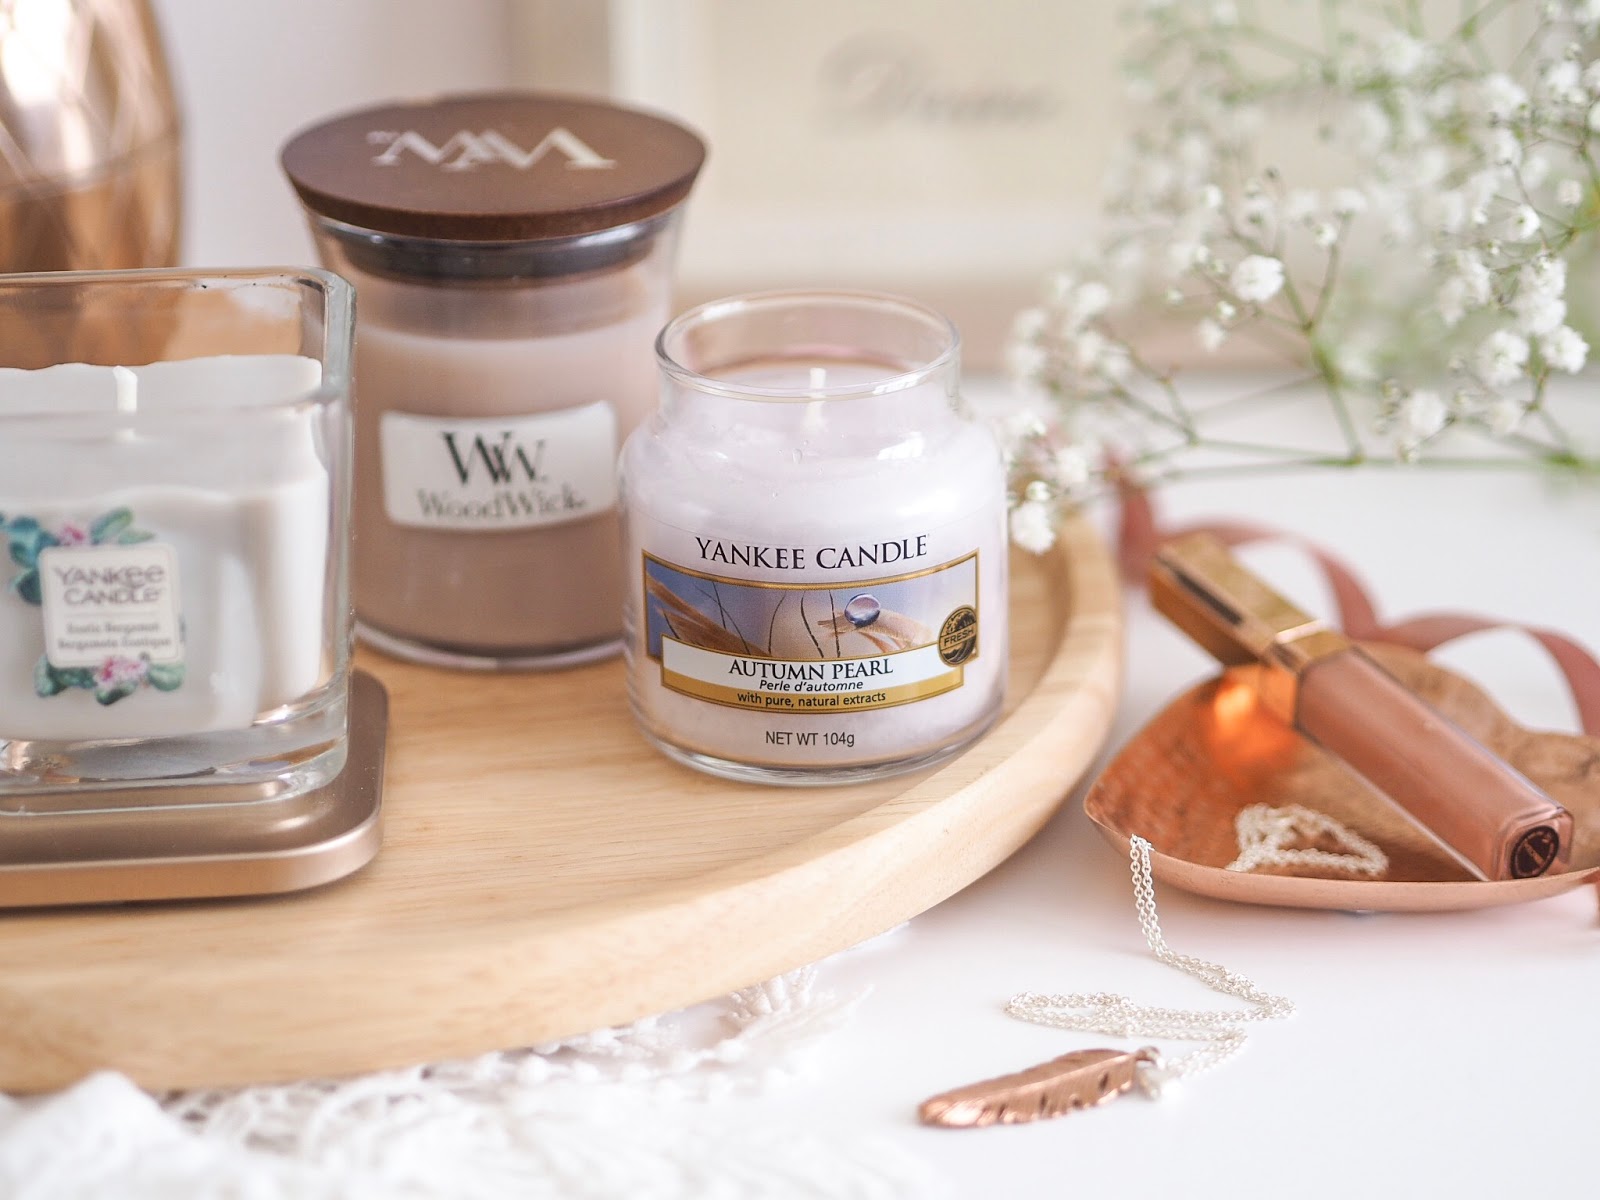 Yankee Candle Elevation Collection & Charming Scents Launch, UK Blogger, Beauty Blogger, Candle Blogger, Fragrance Blogger, Fragrance Review